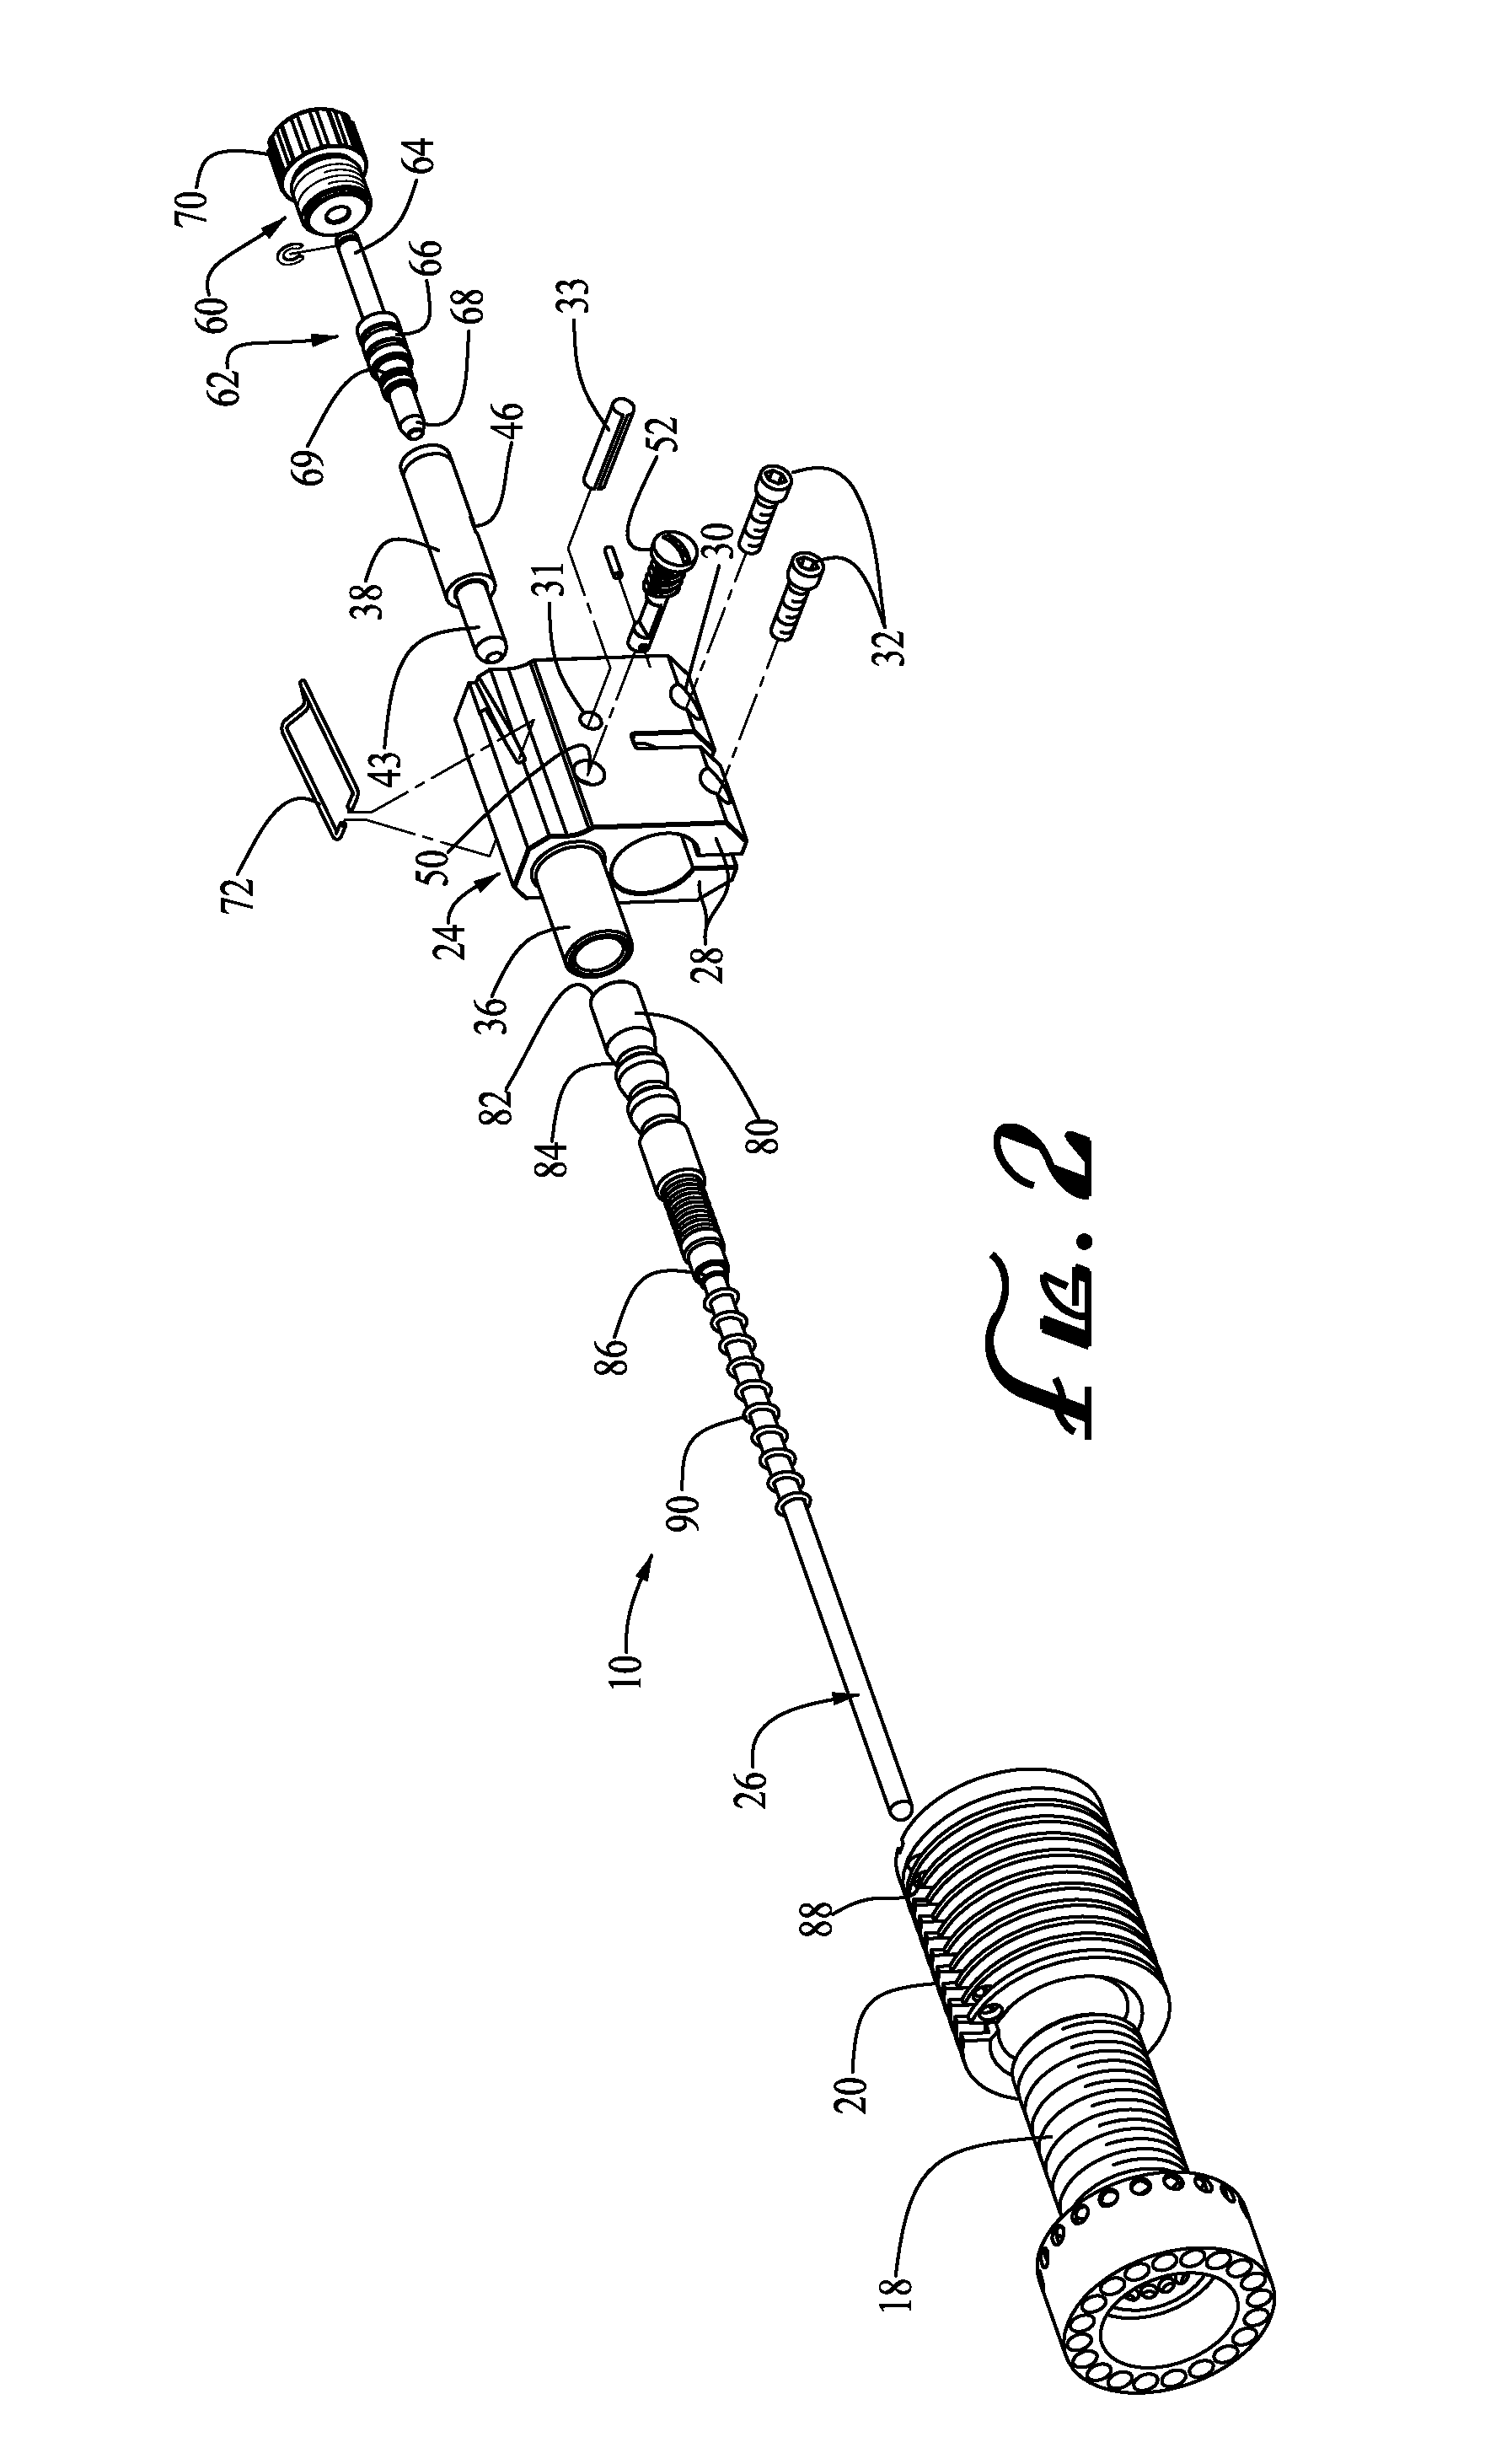 Gas piston control system for a firearm